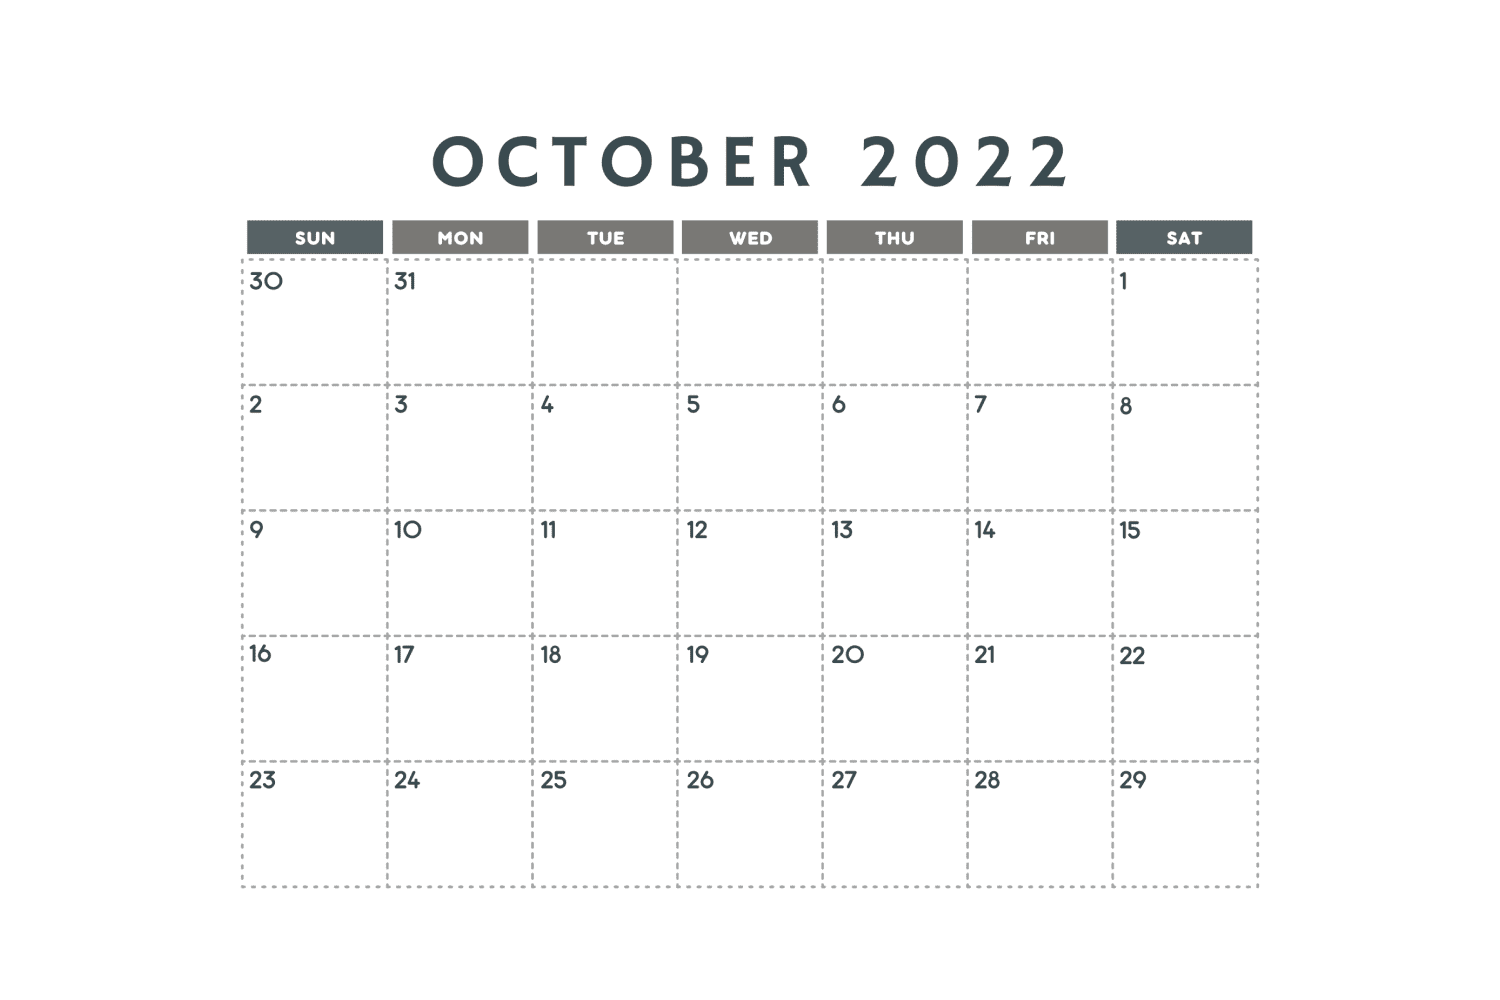 Simple calendar for October with the ability to make notes.